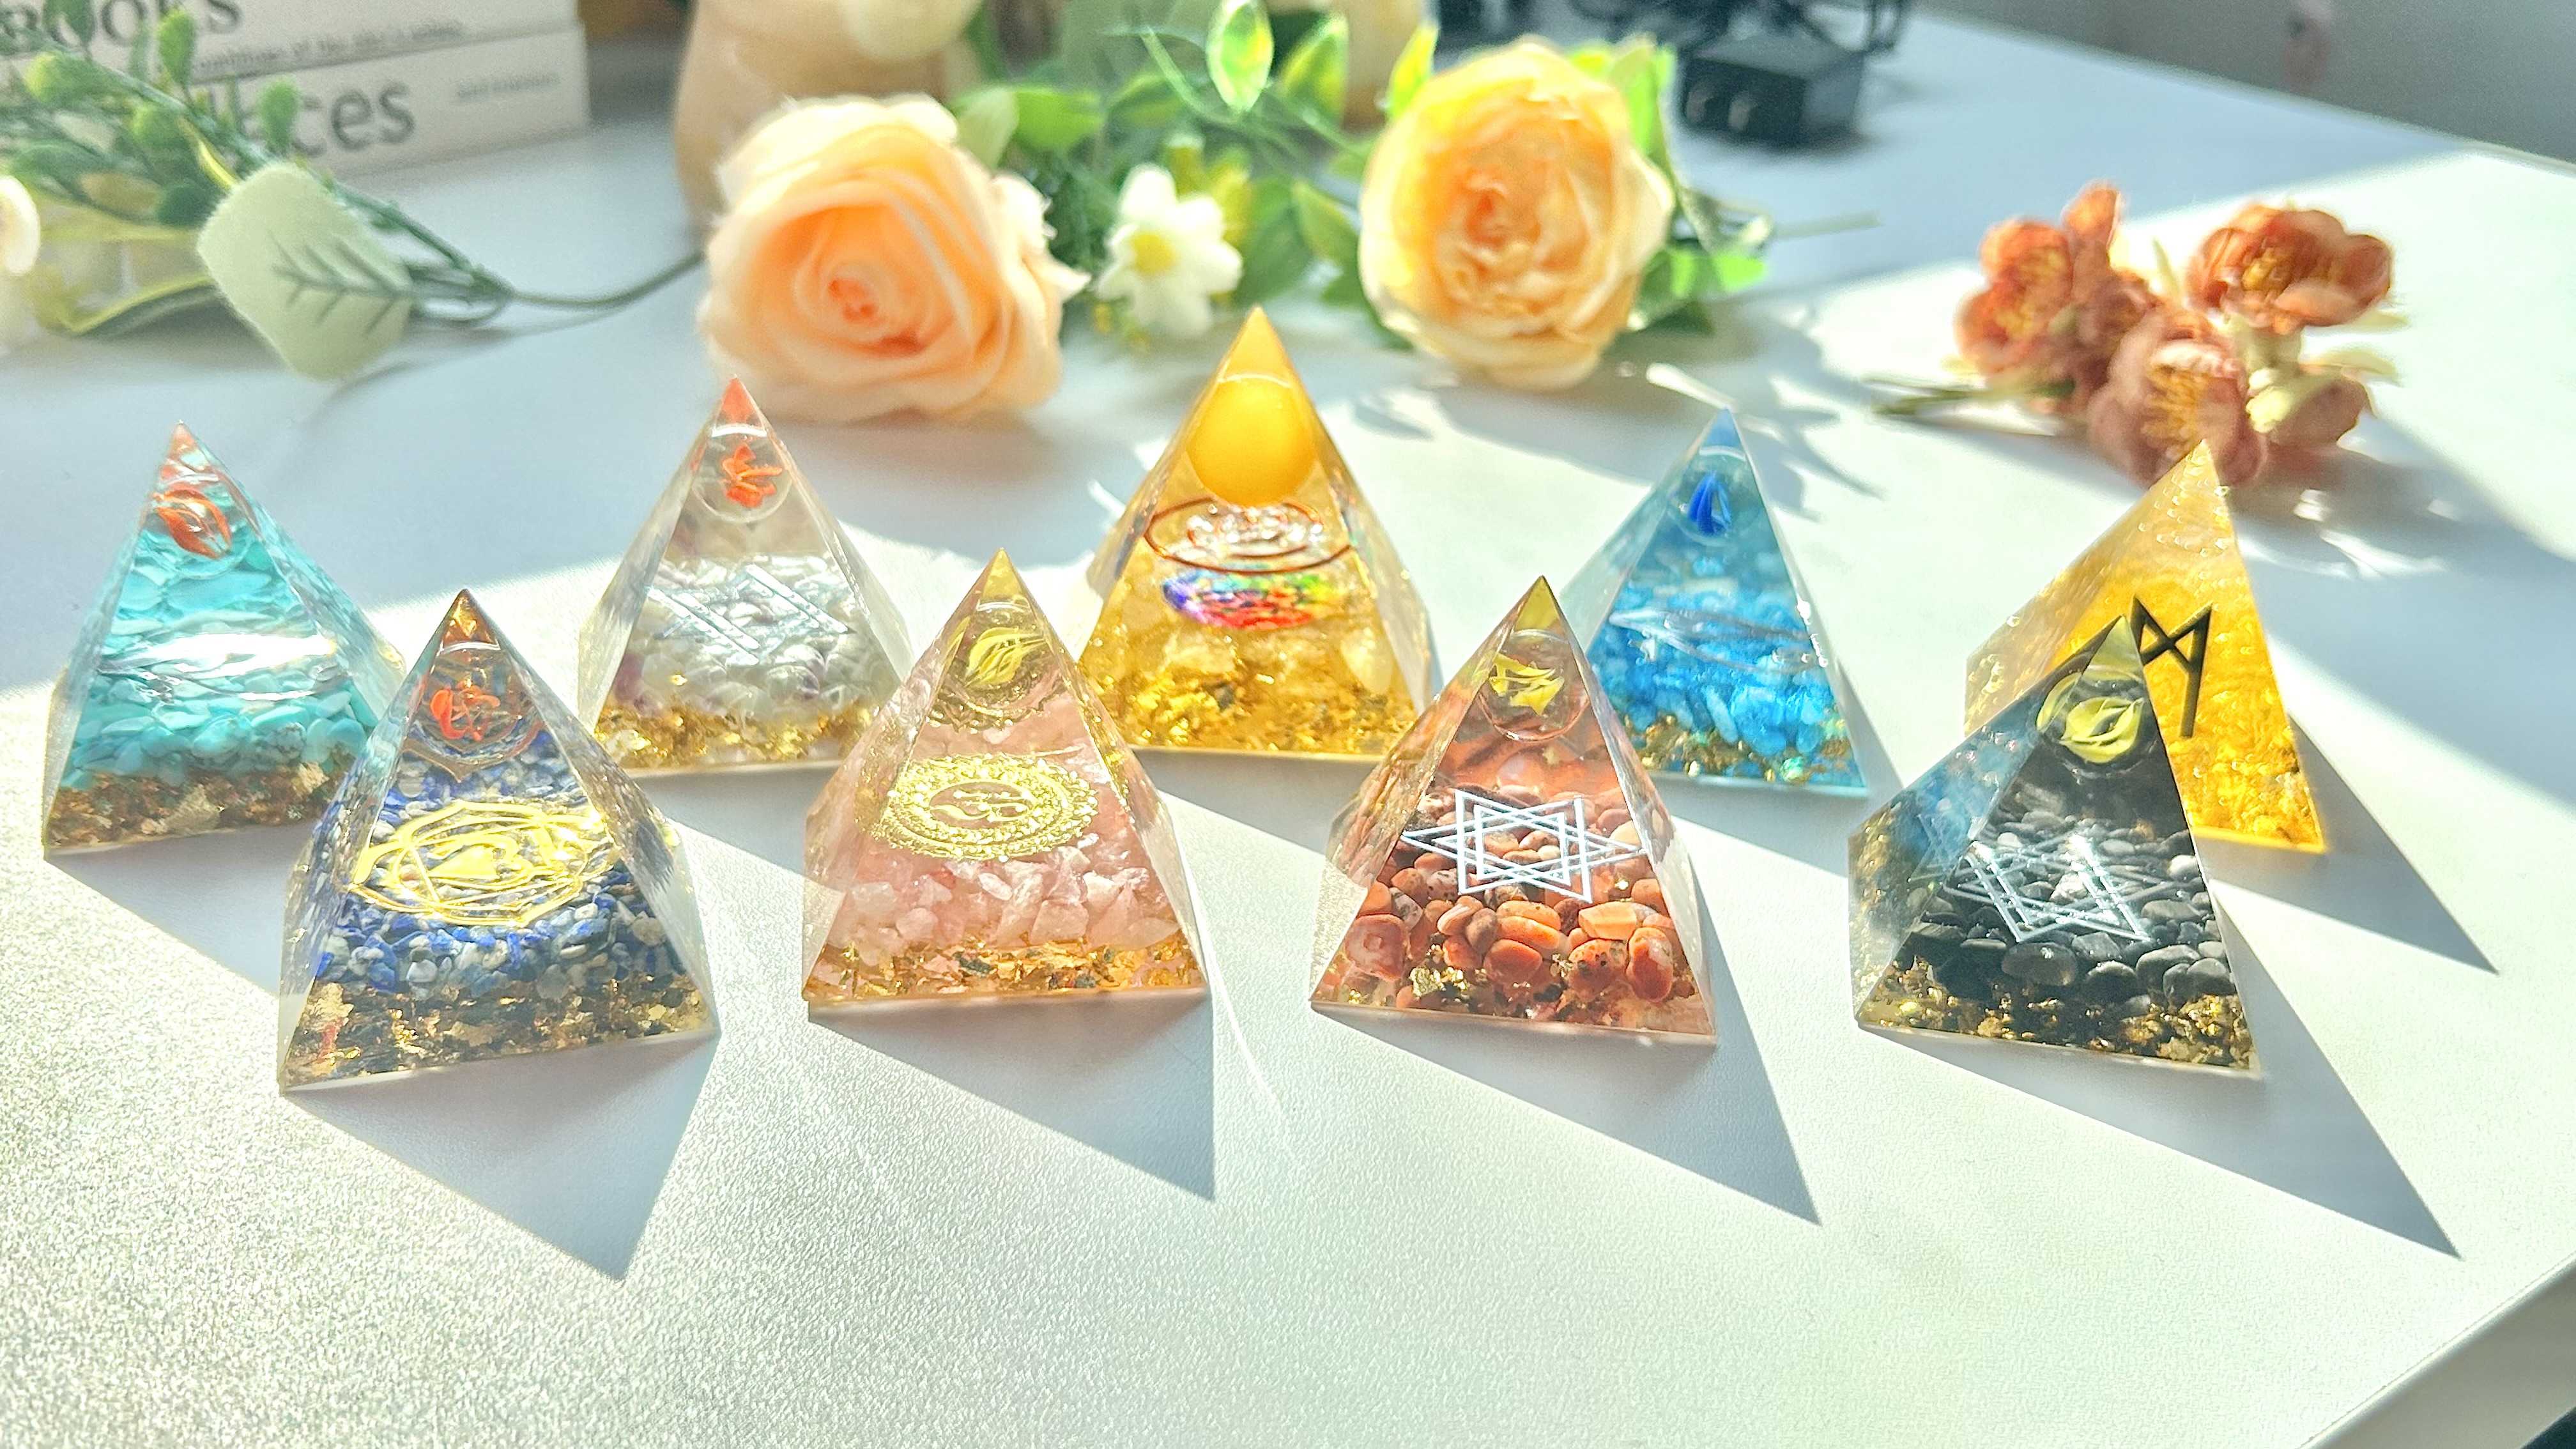 Pyramid Series Crystals and Jewelry for sale-Helmsman Crystal